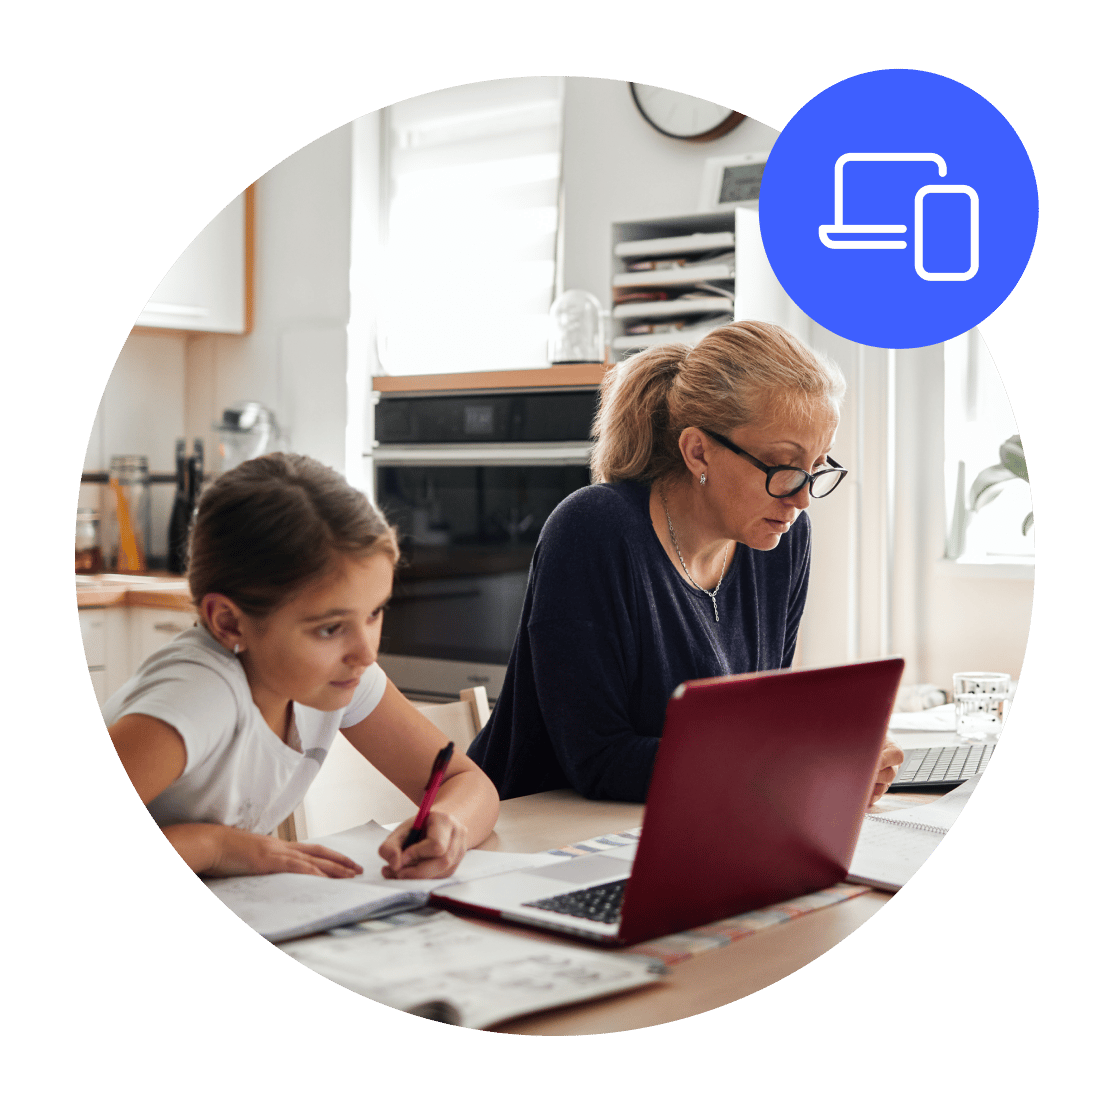 A mother and daughter using laptops connected to the same VPN client.